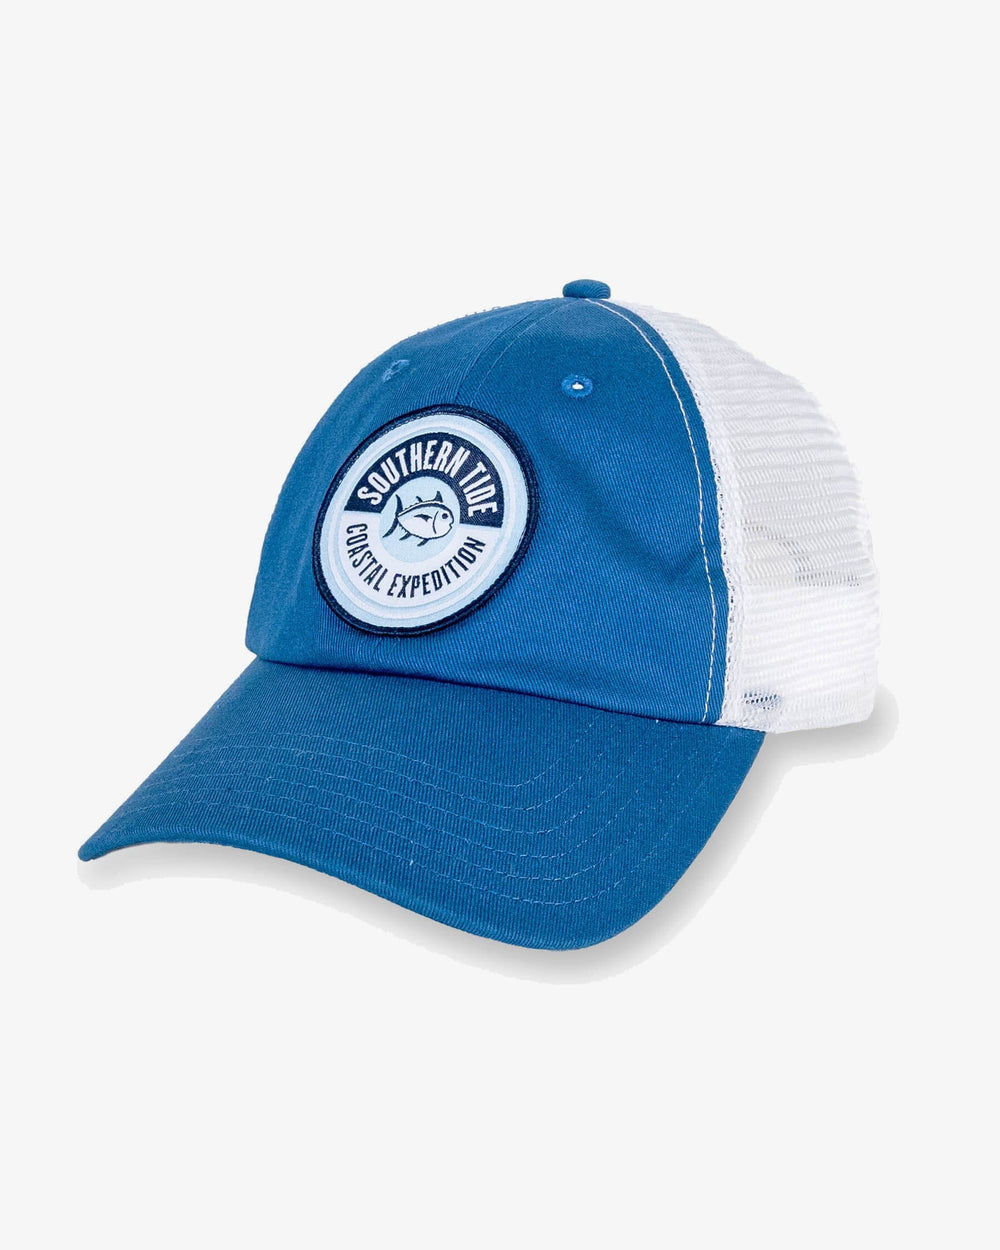 The front view of the Southern Tide Coastal Expedition Patch Trucker Hat by Southern Tide - Dark Blue